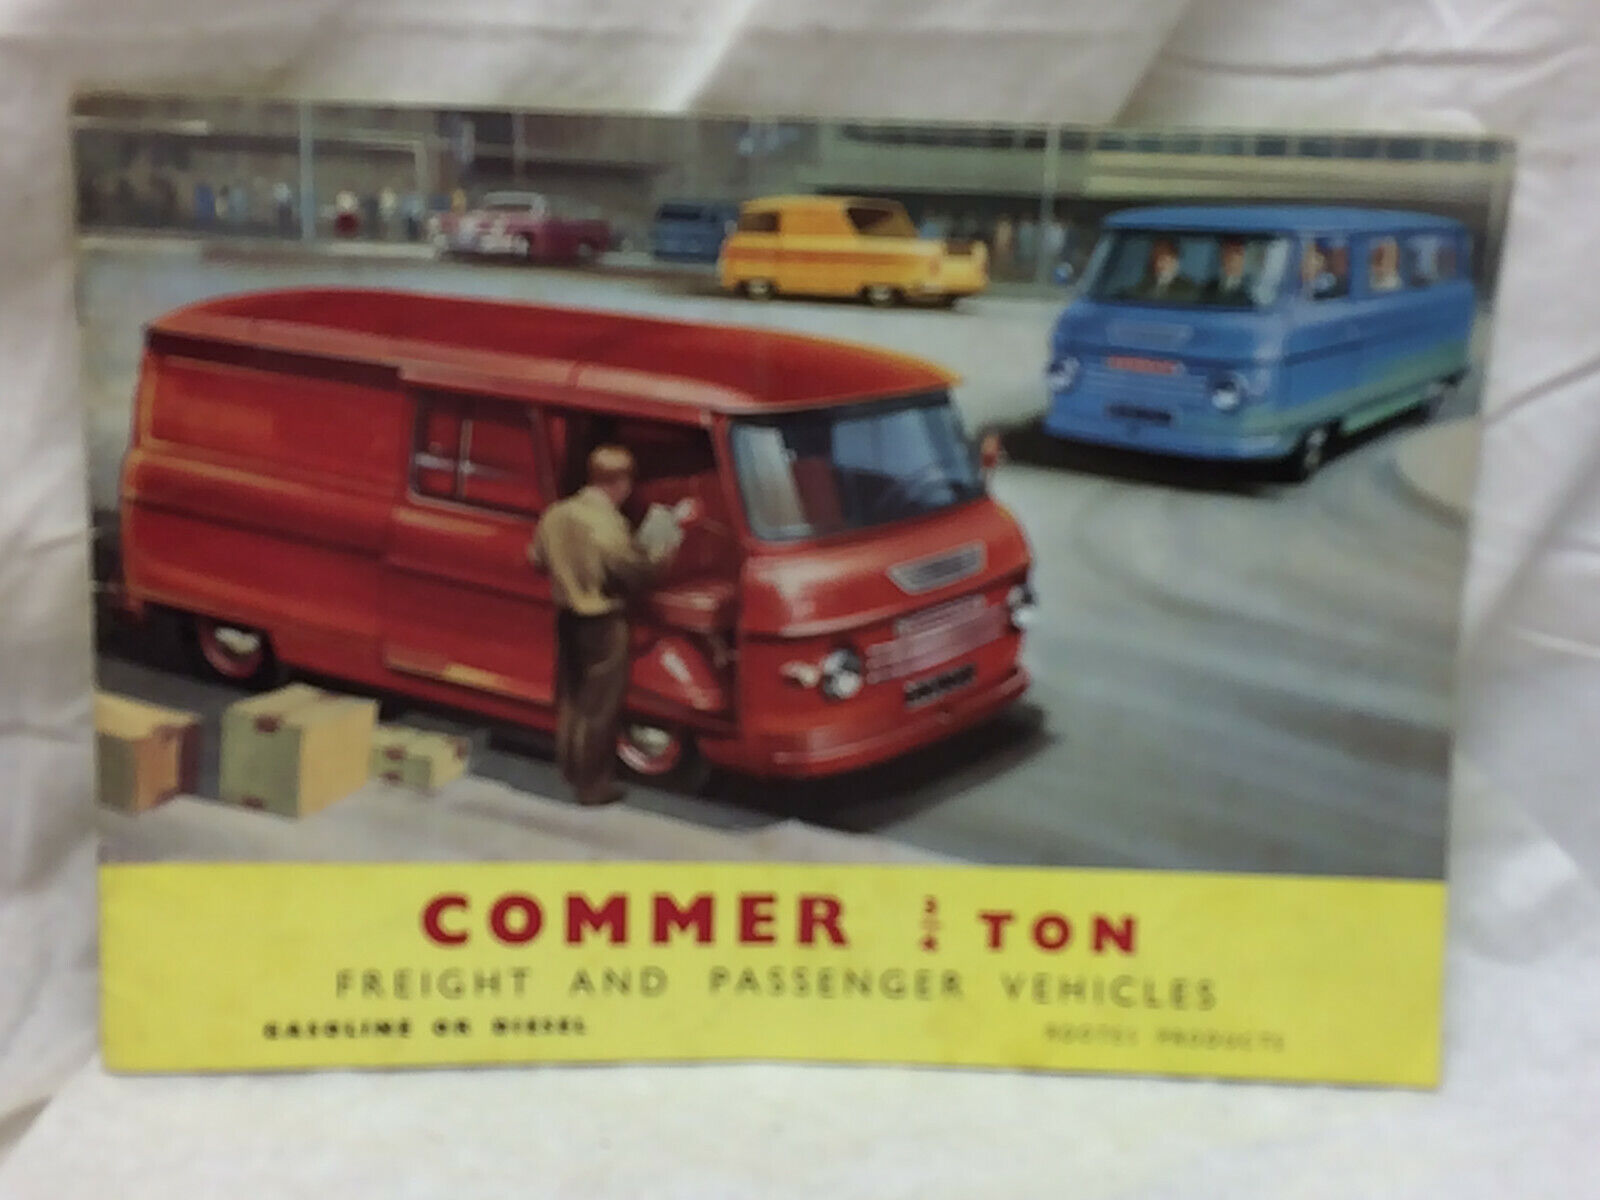 Vintage Booklet Commer 3/4 Ton Freight and Passenger Vehicles Rootes Products